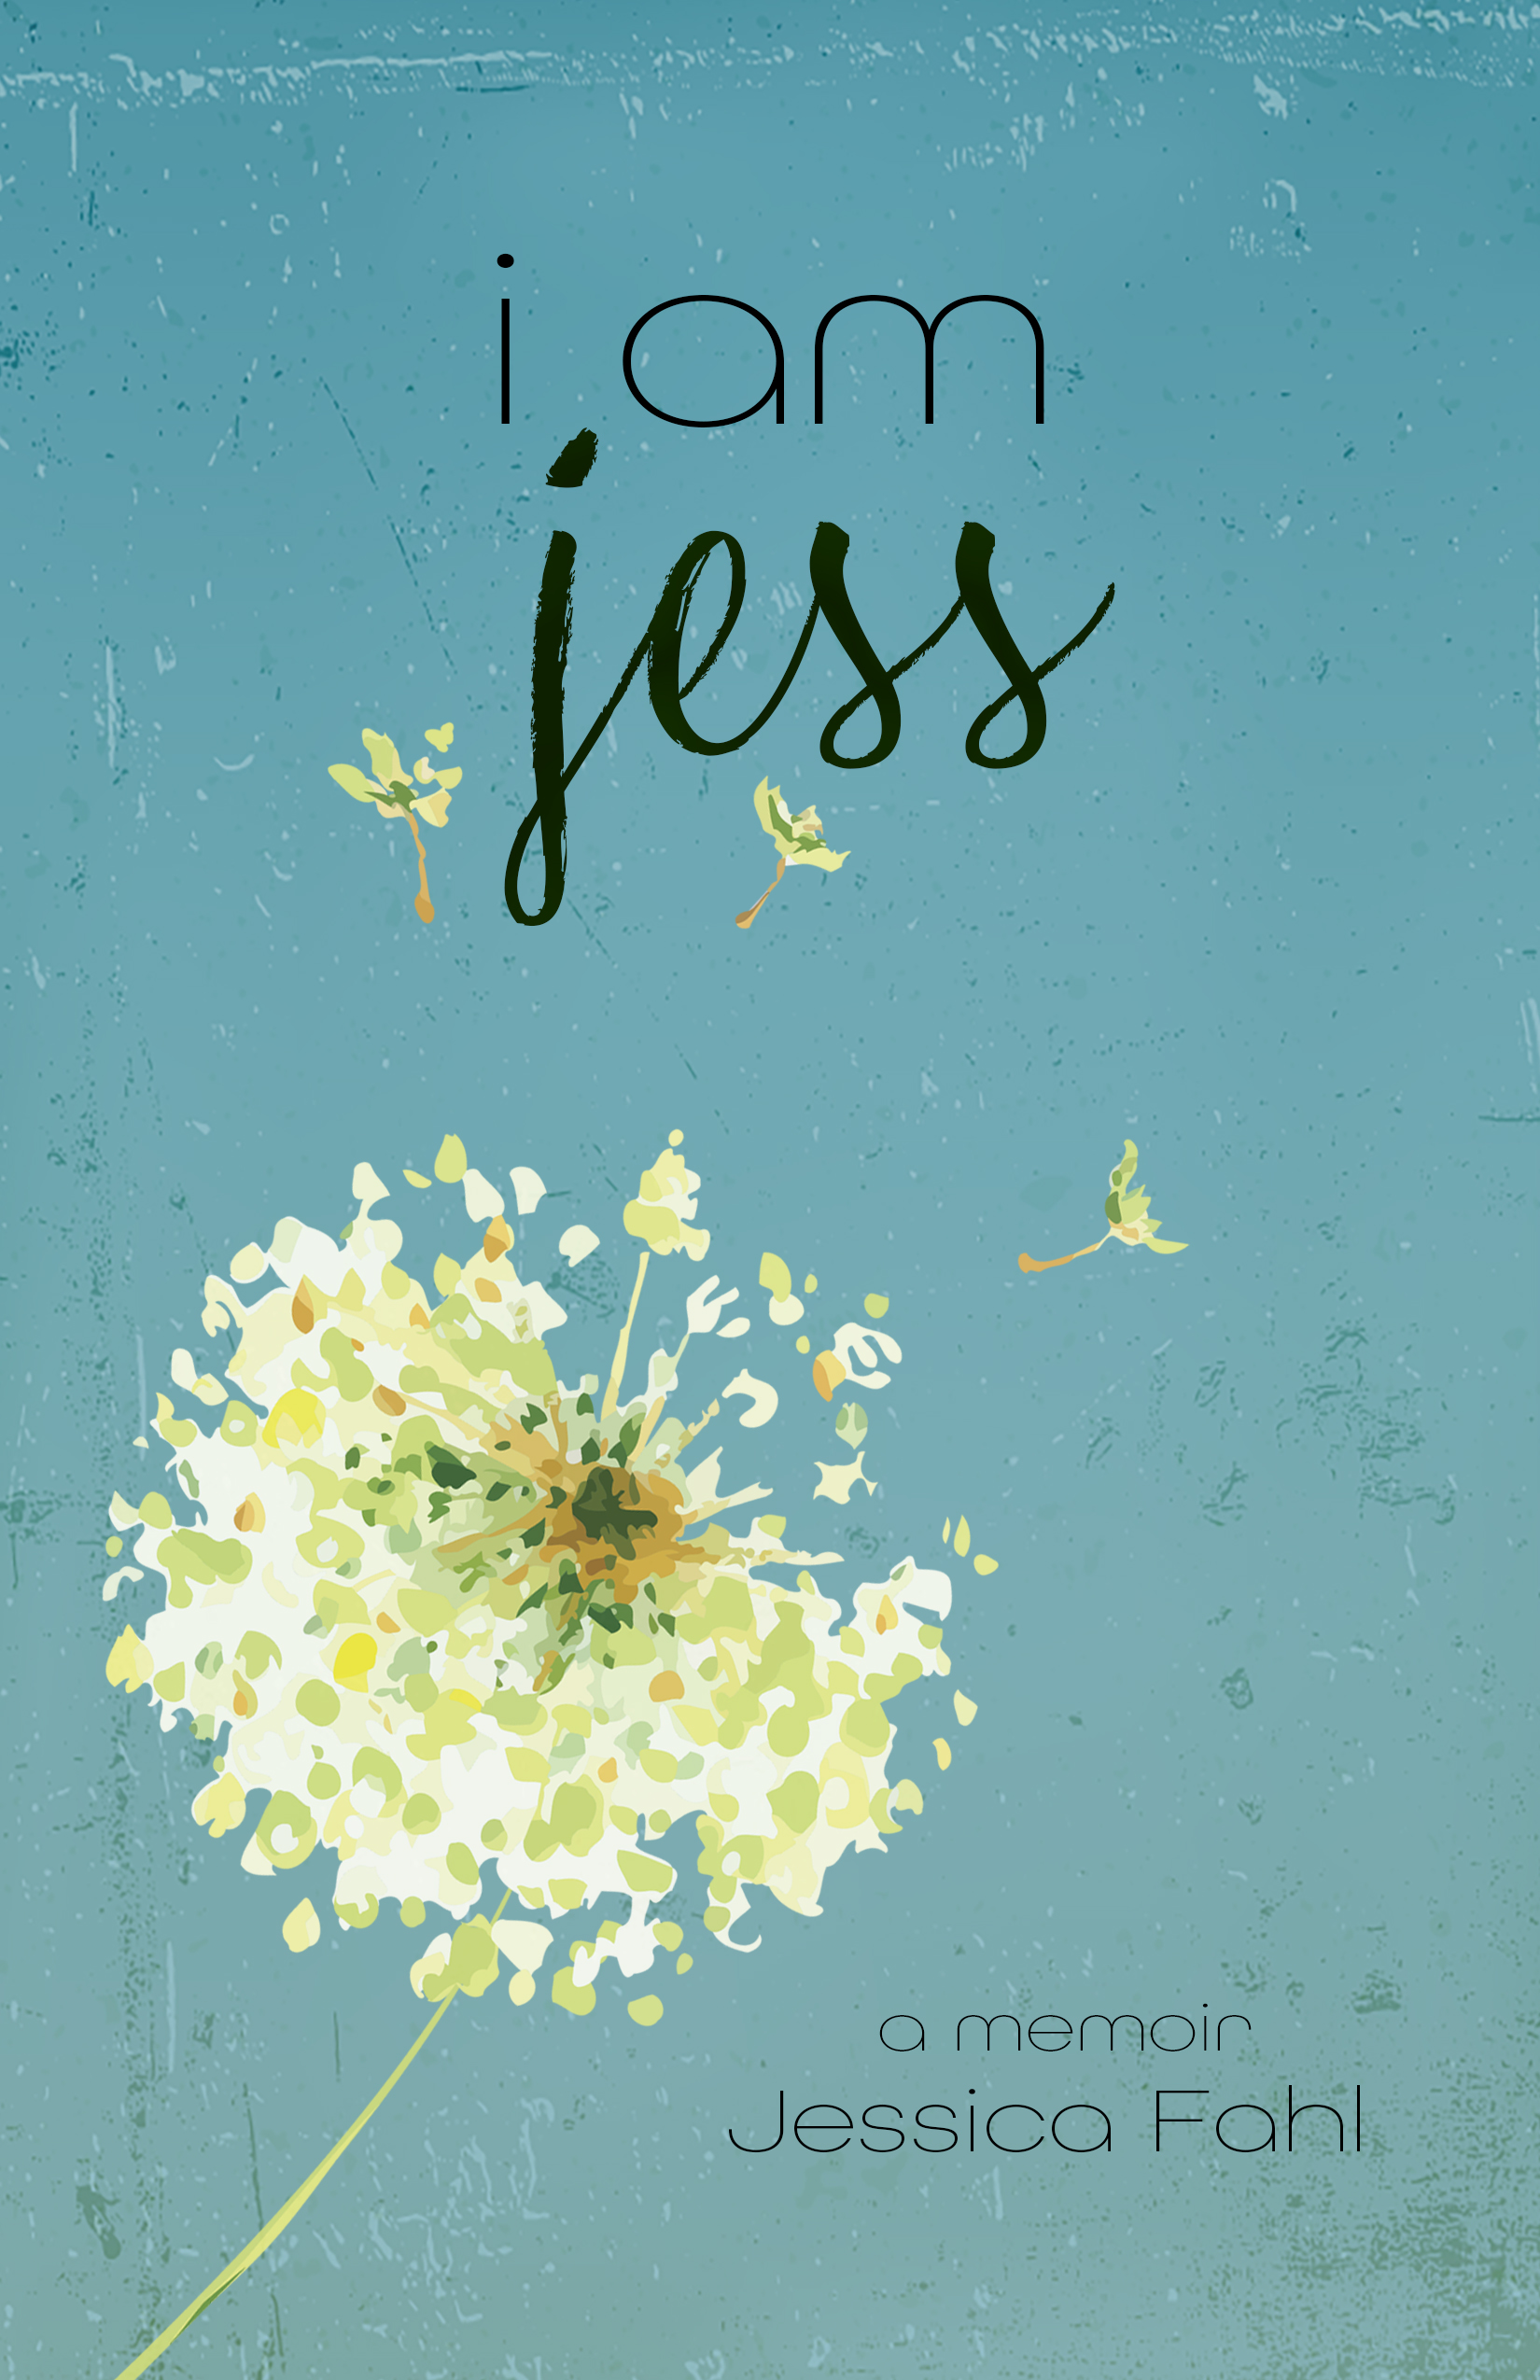 Teal background with an ivory puffed dandelion spreading it's seeds. The title, i am jess, is in lowercase black lettering at the top of the cover.